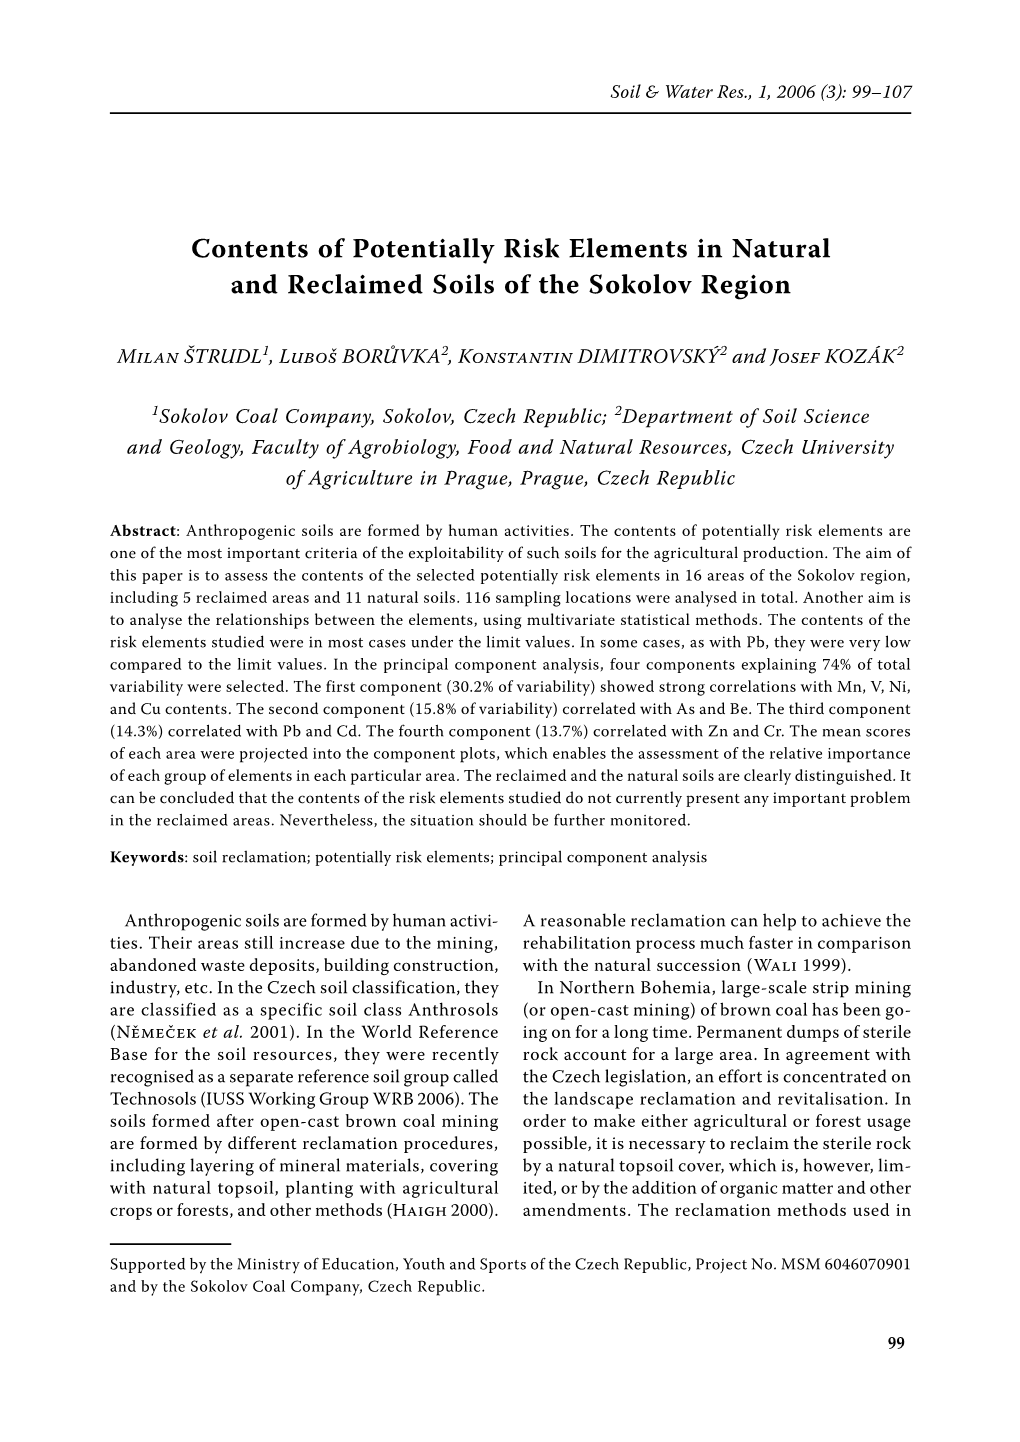 Contents of Potentially Risk Elements in Natural and Reclaimed Soils of the Sokolov Region